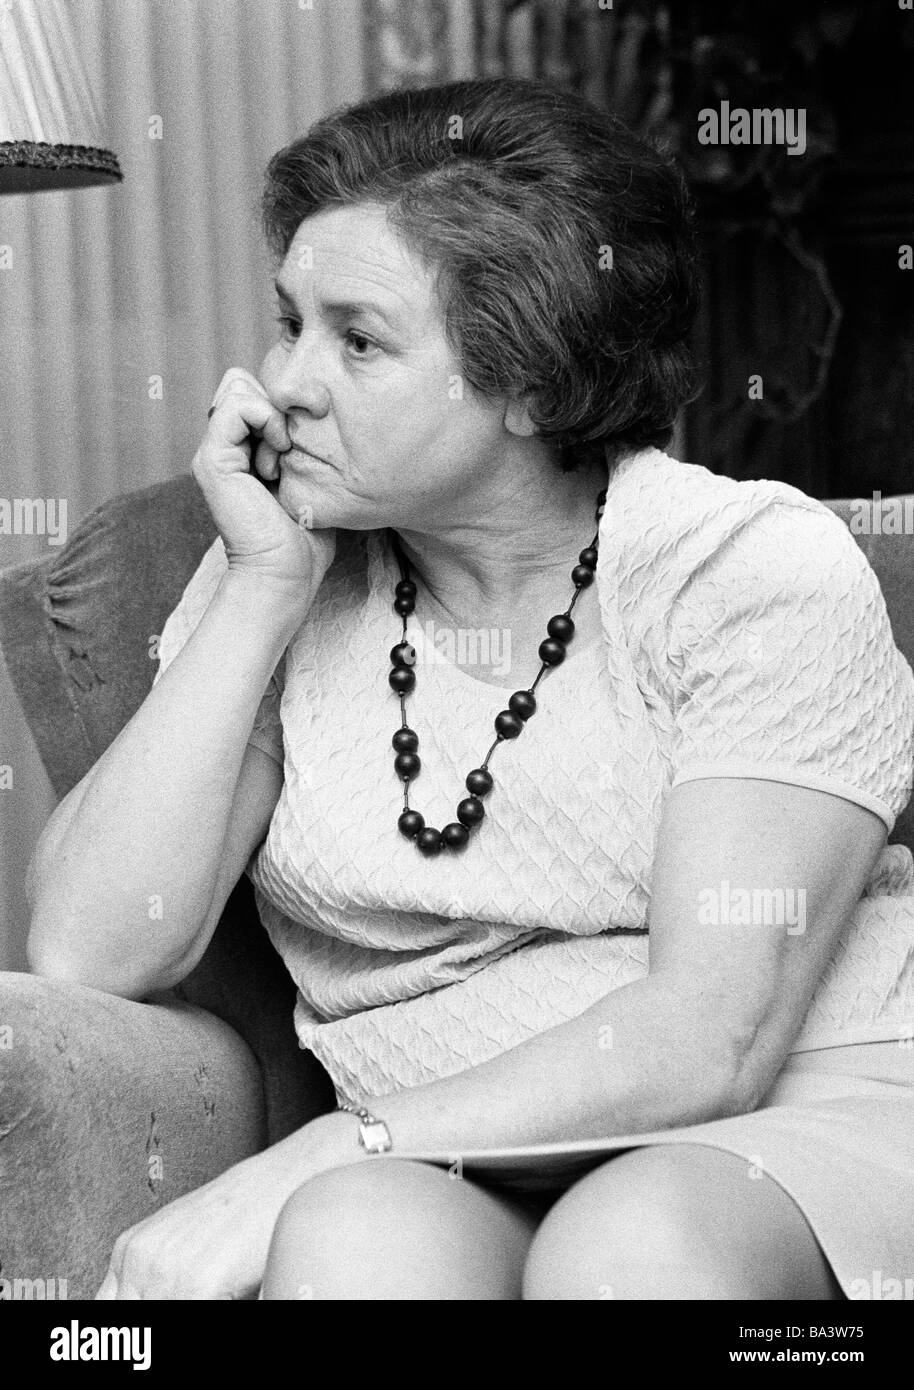 Sixties, black and white photo, people, senior, older woman sits in an  armchair, depression, portrait, blouse, skirt, necklet, aged 65 to 70  years, Kaethe Stock Photo - Alamy